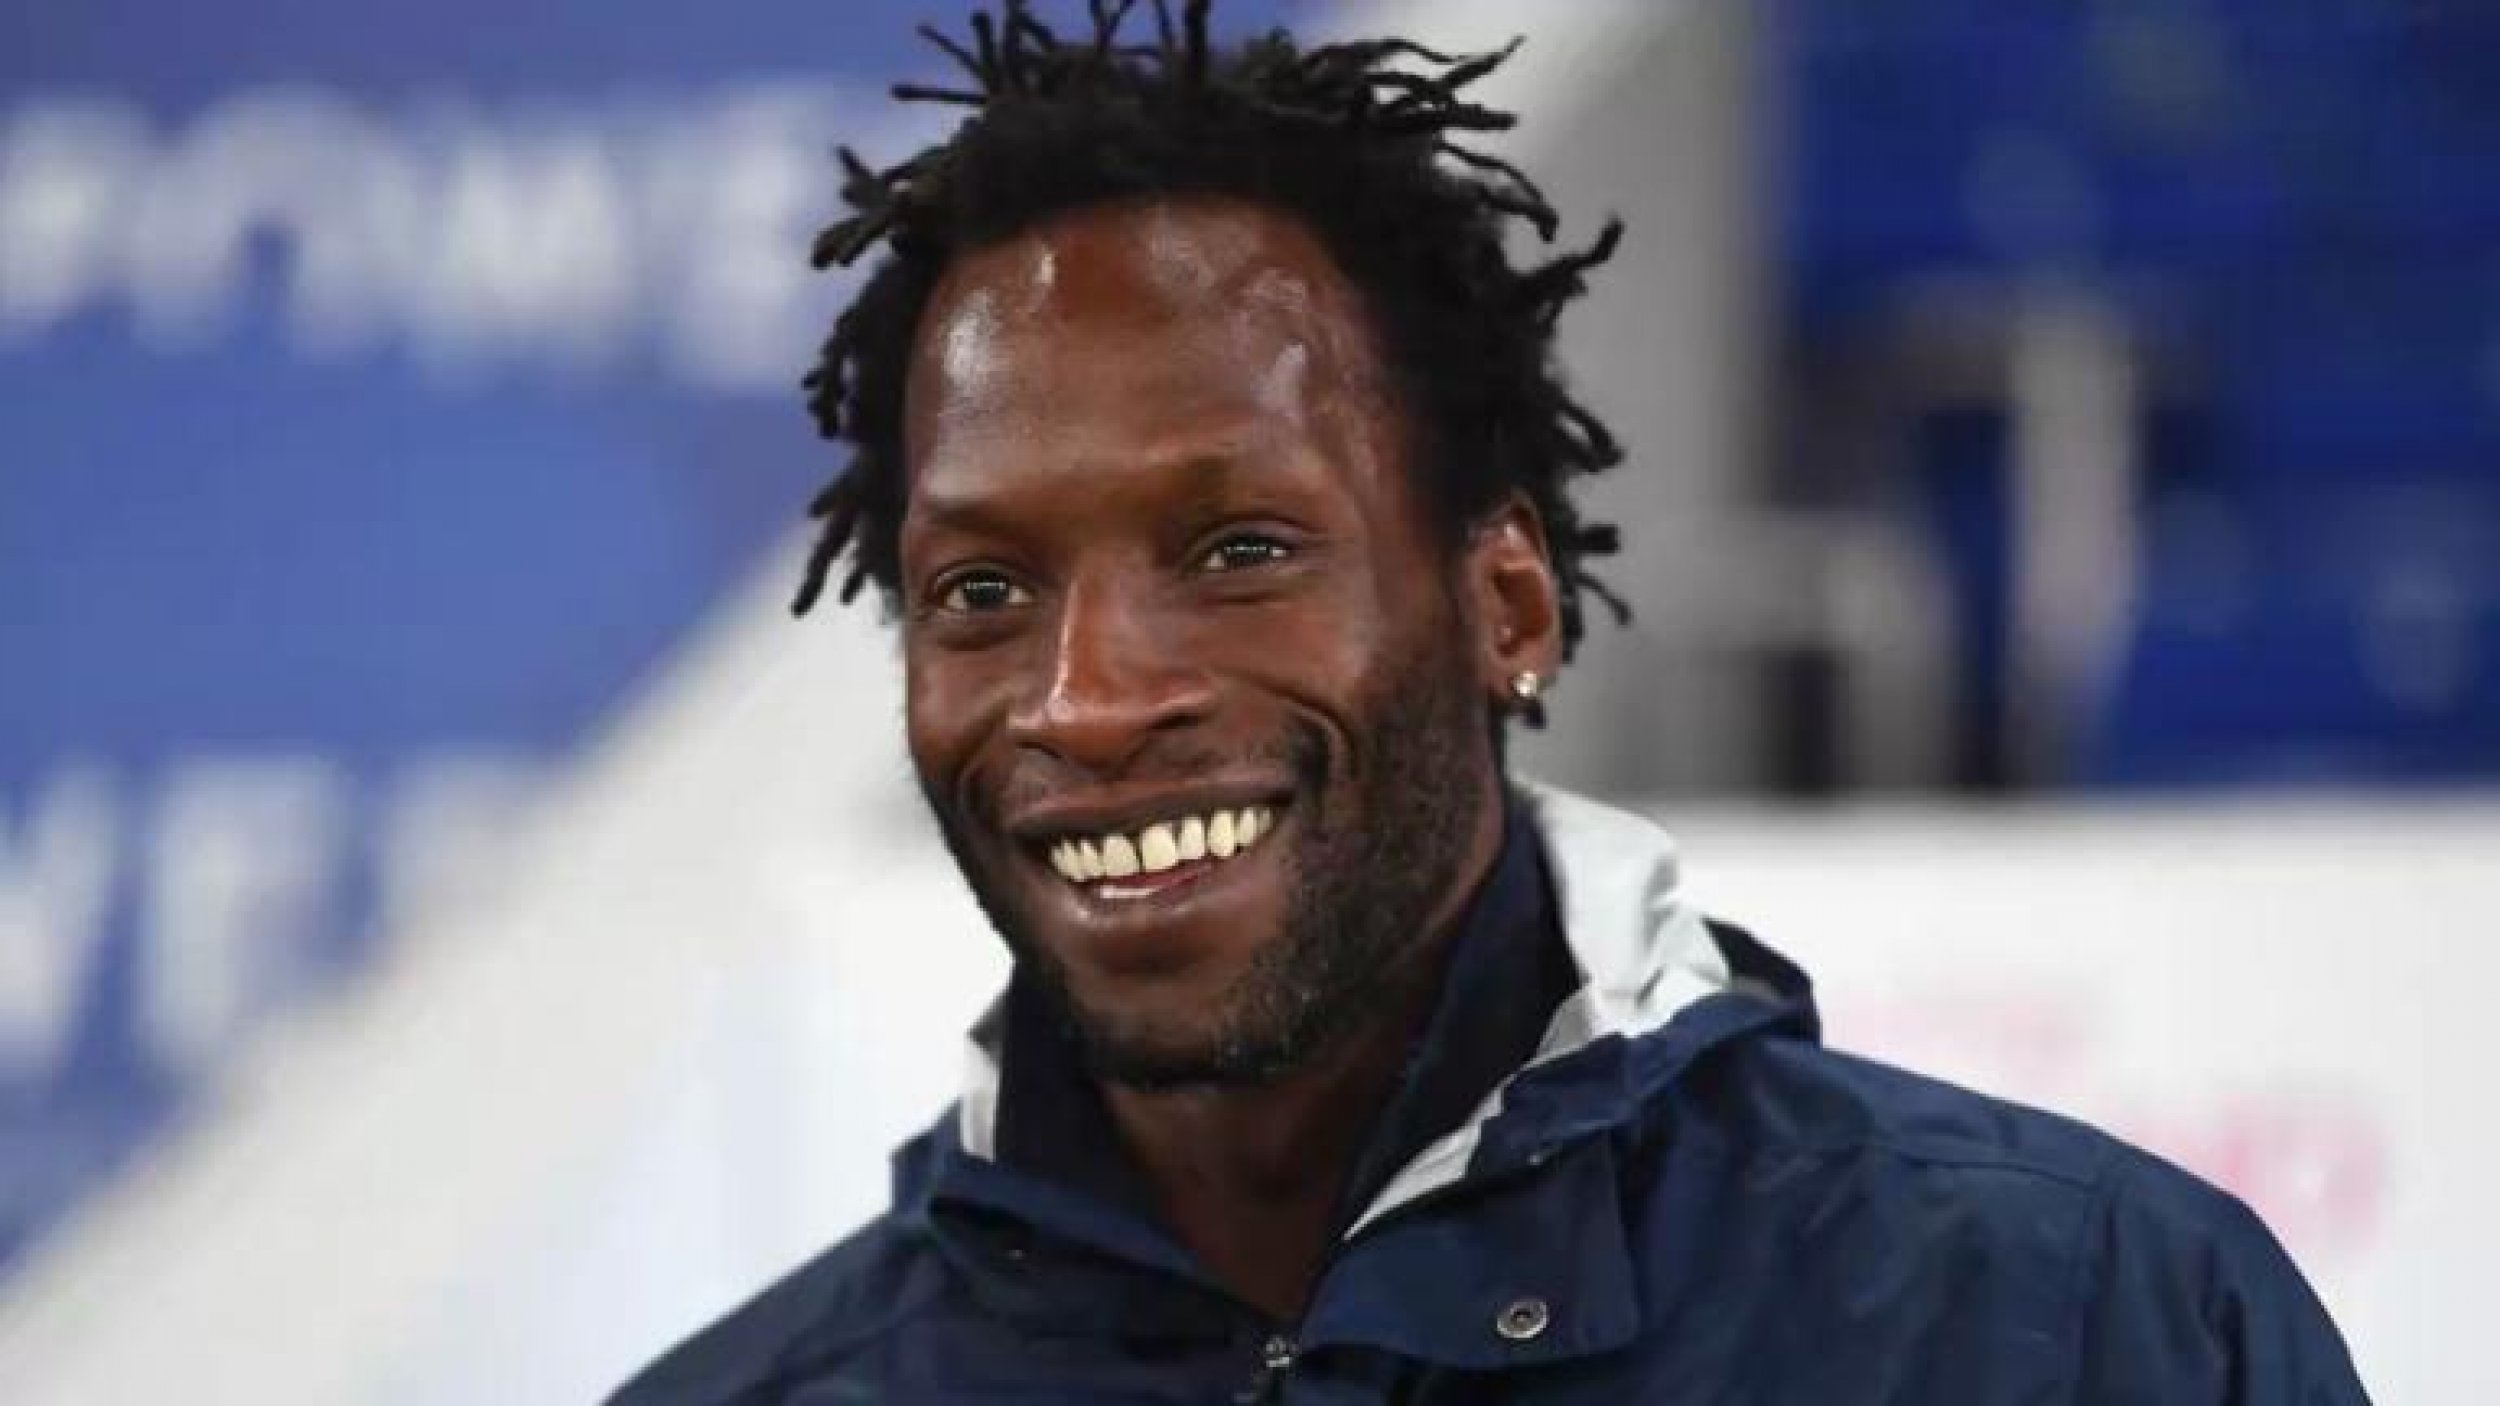 Tributes pour in for Ugo Ehiogu from football stars on social media